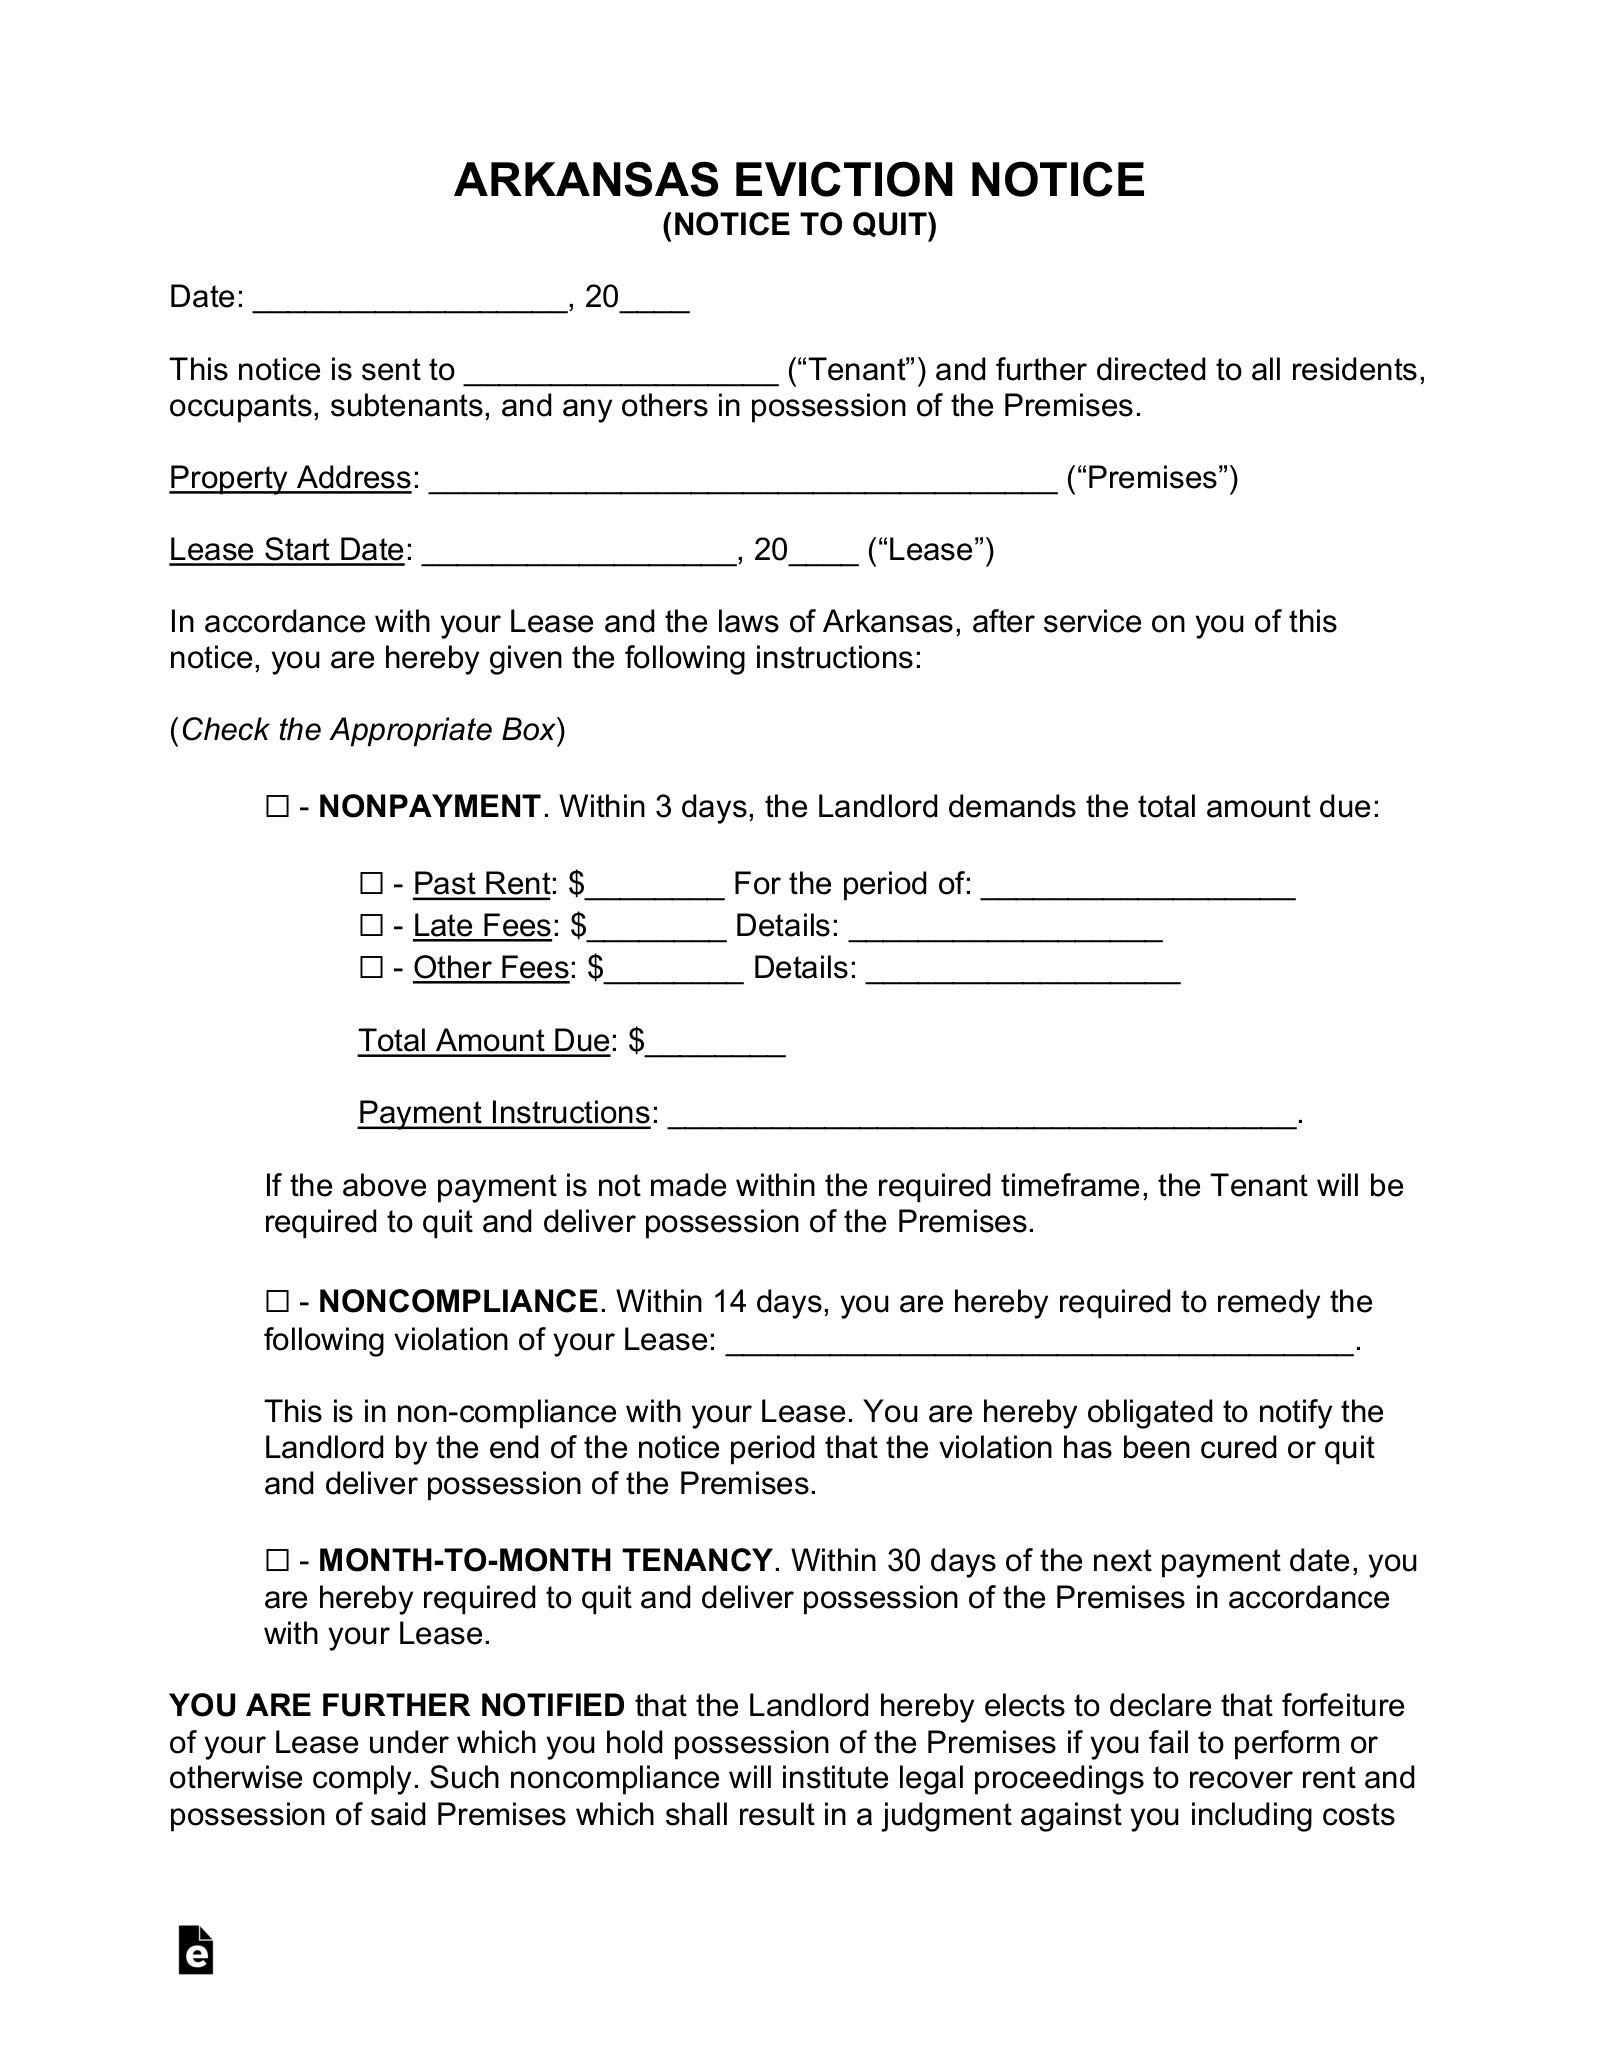 Arkansas Eviction Notice Forms (3)